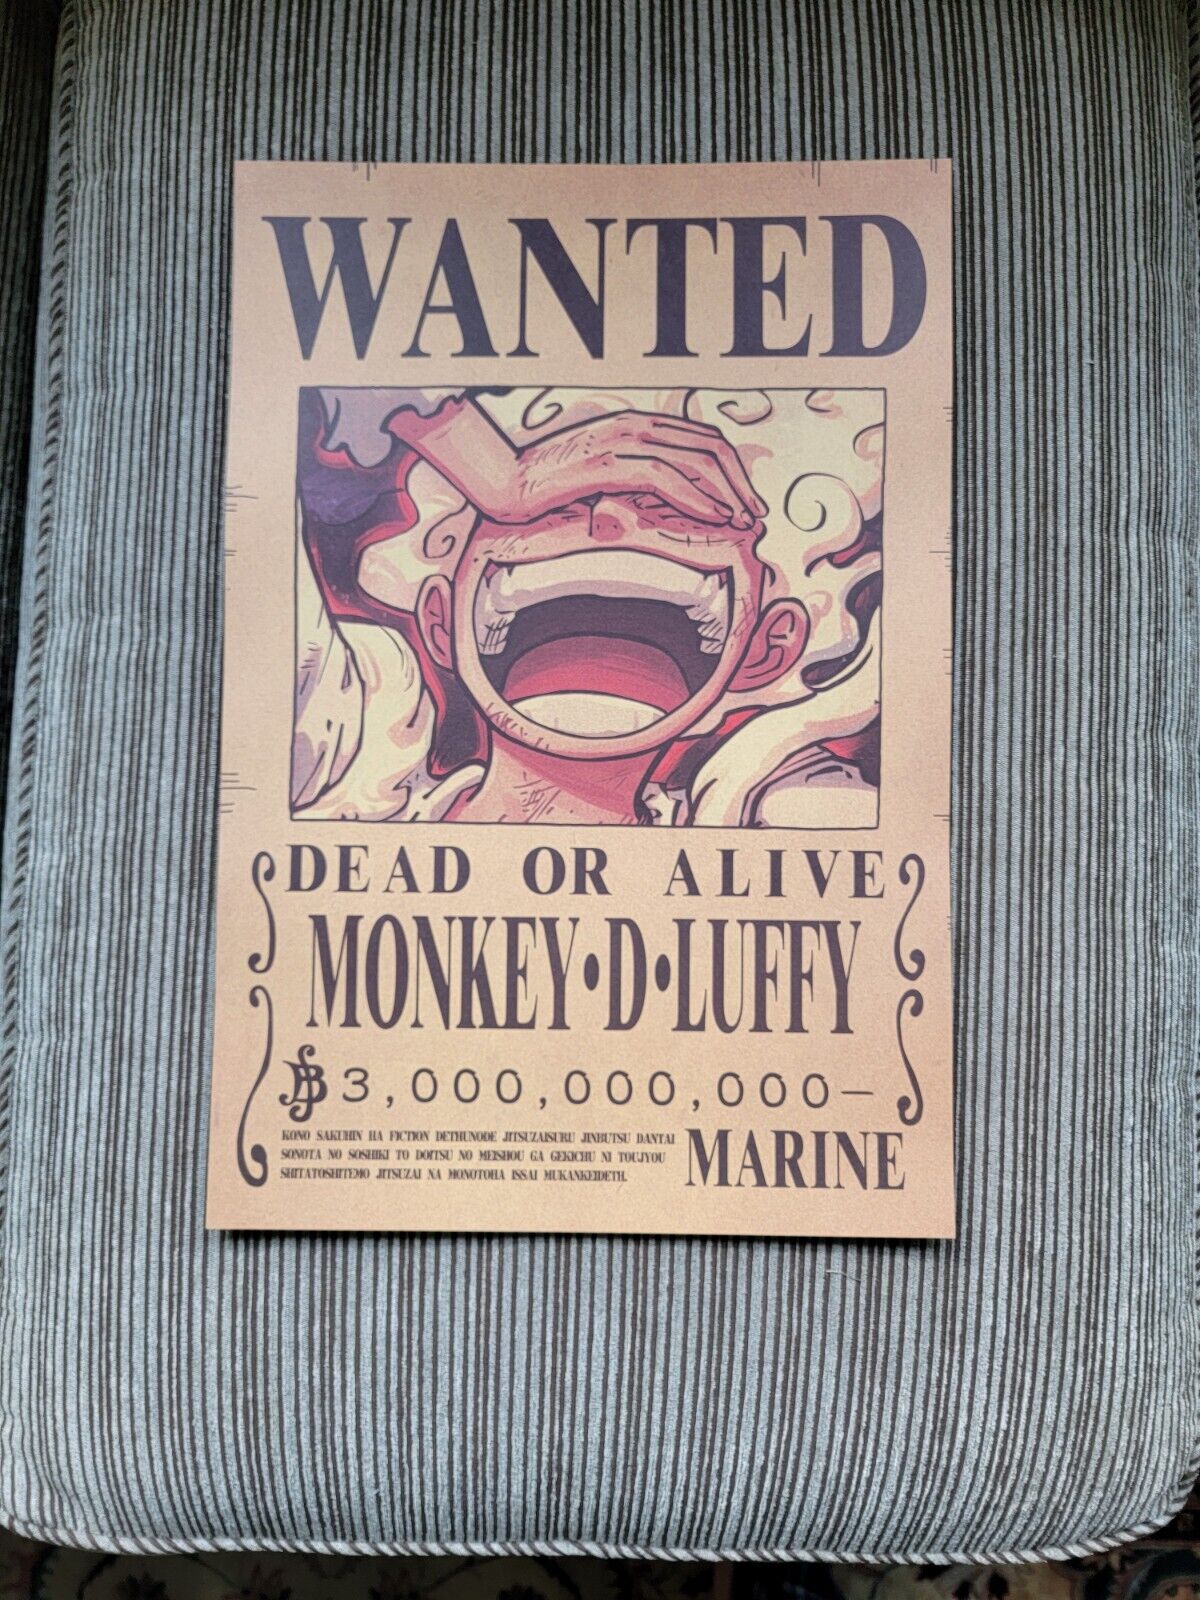 One Piece Wanted Posters With New Bounties (Post Wano) - HIGH QUALITY